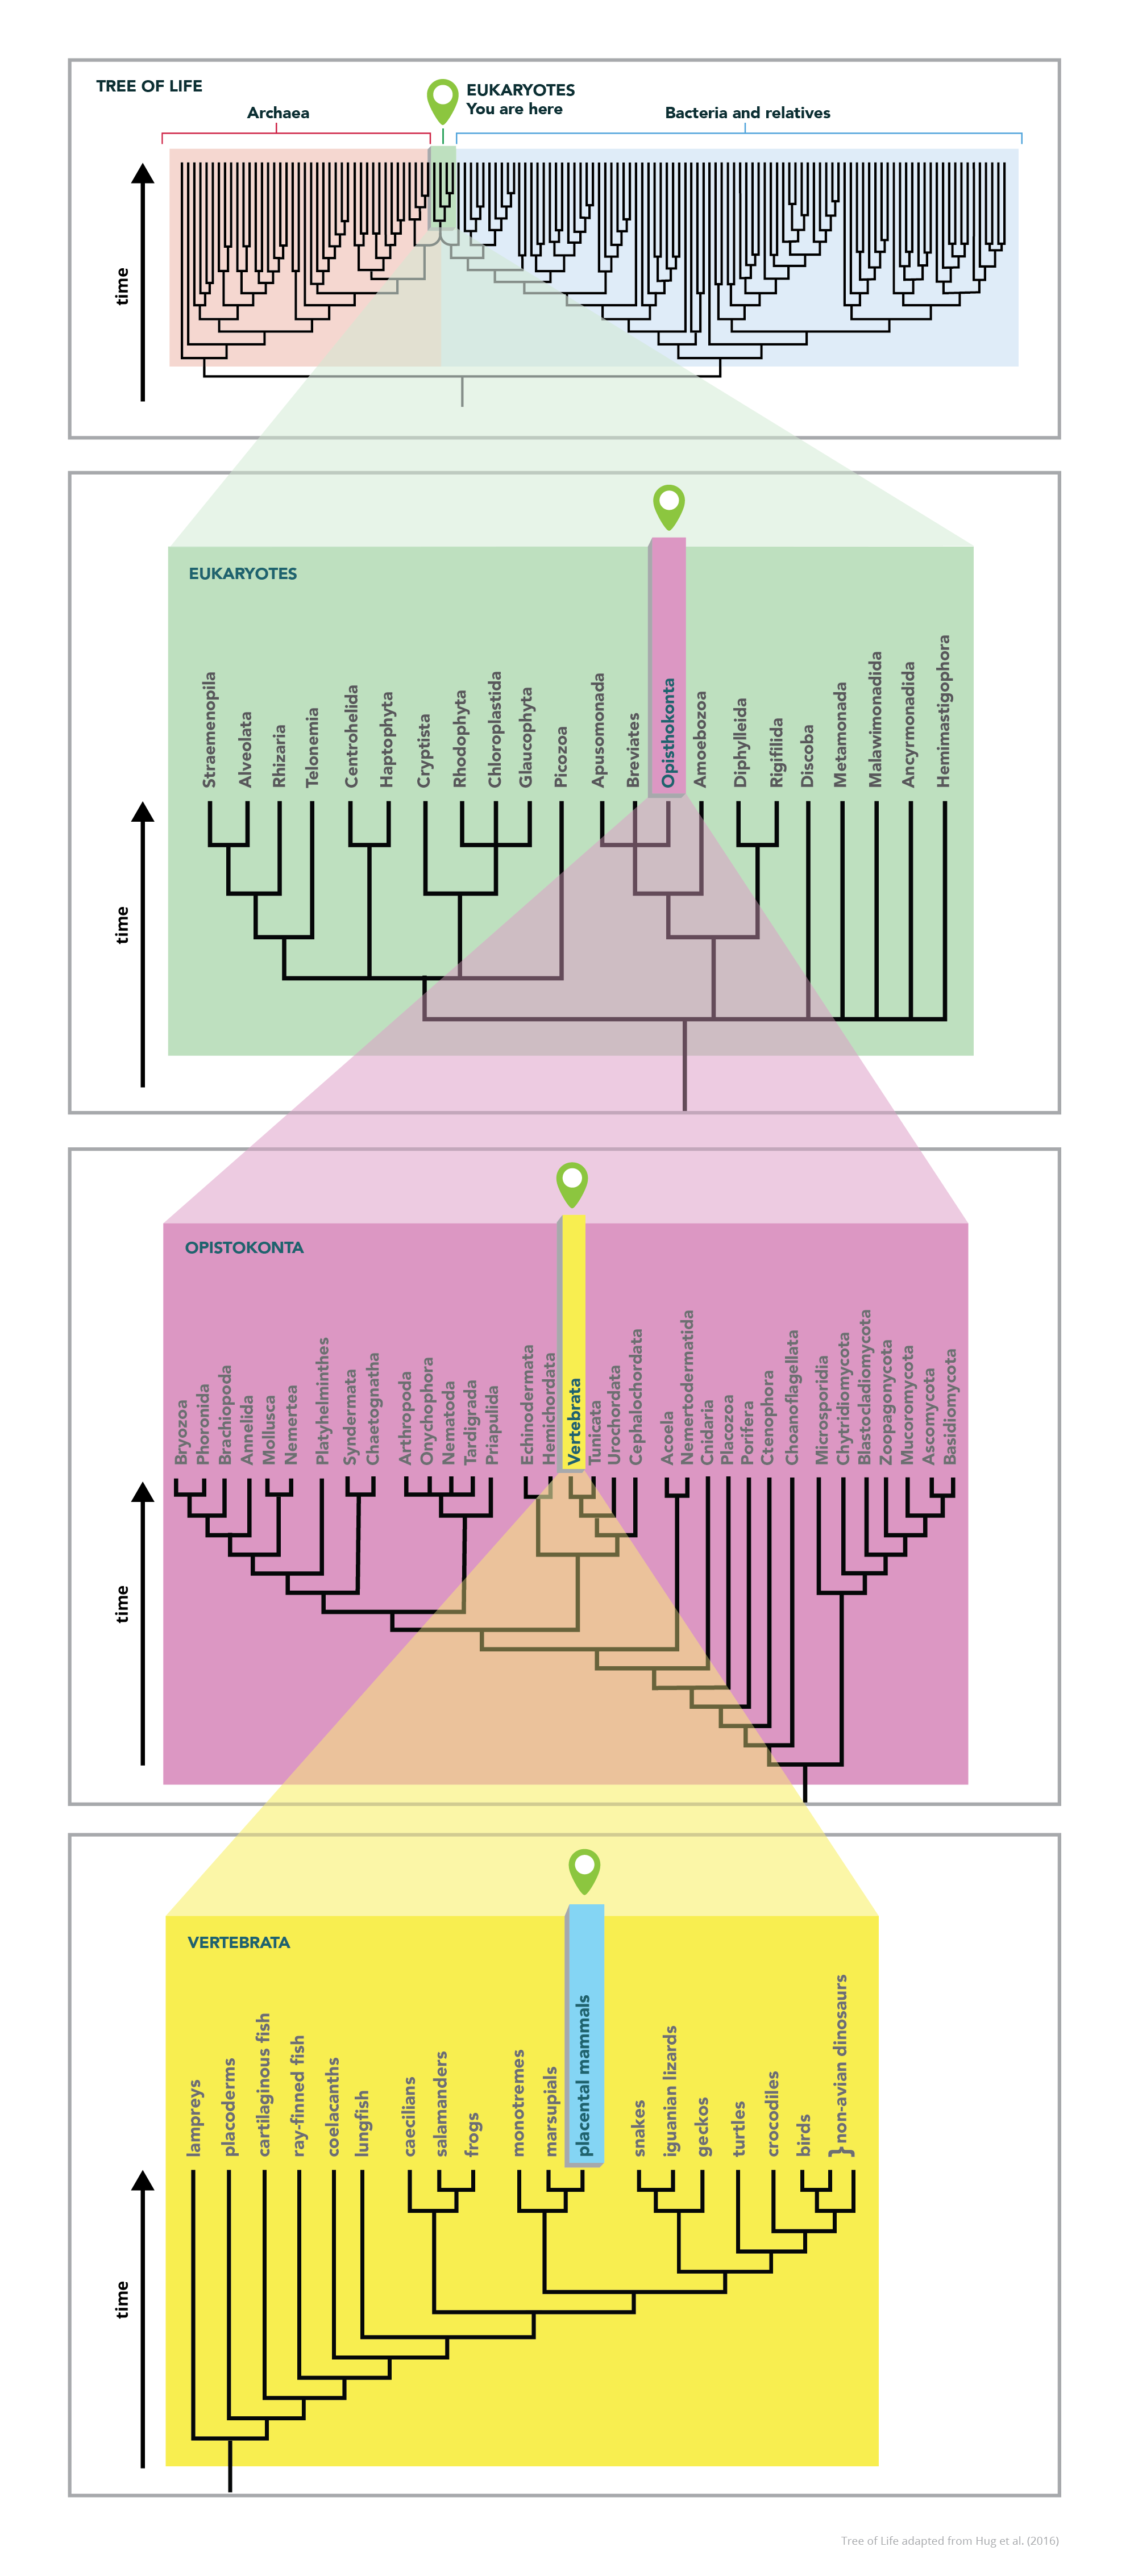 Series of phylogenies showing the process of zooming in on the branch belonging to Eukaryotes.